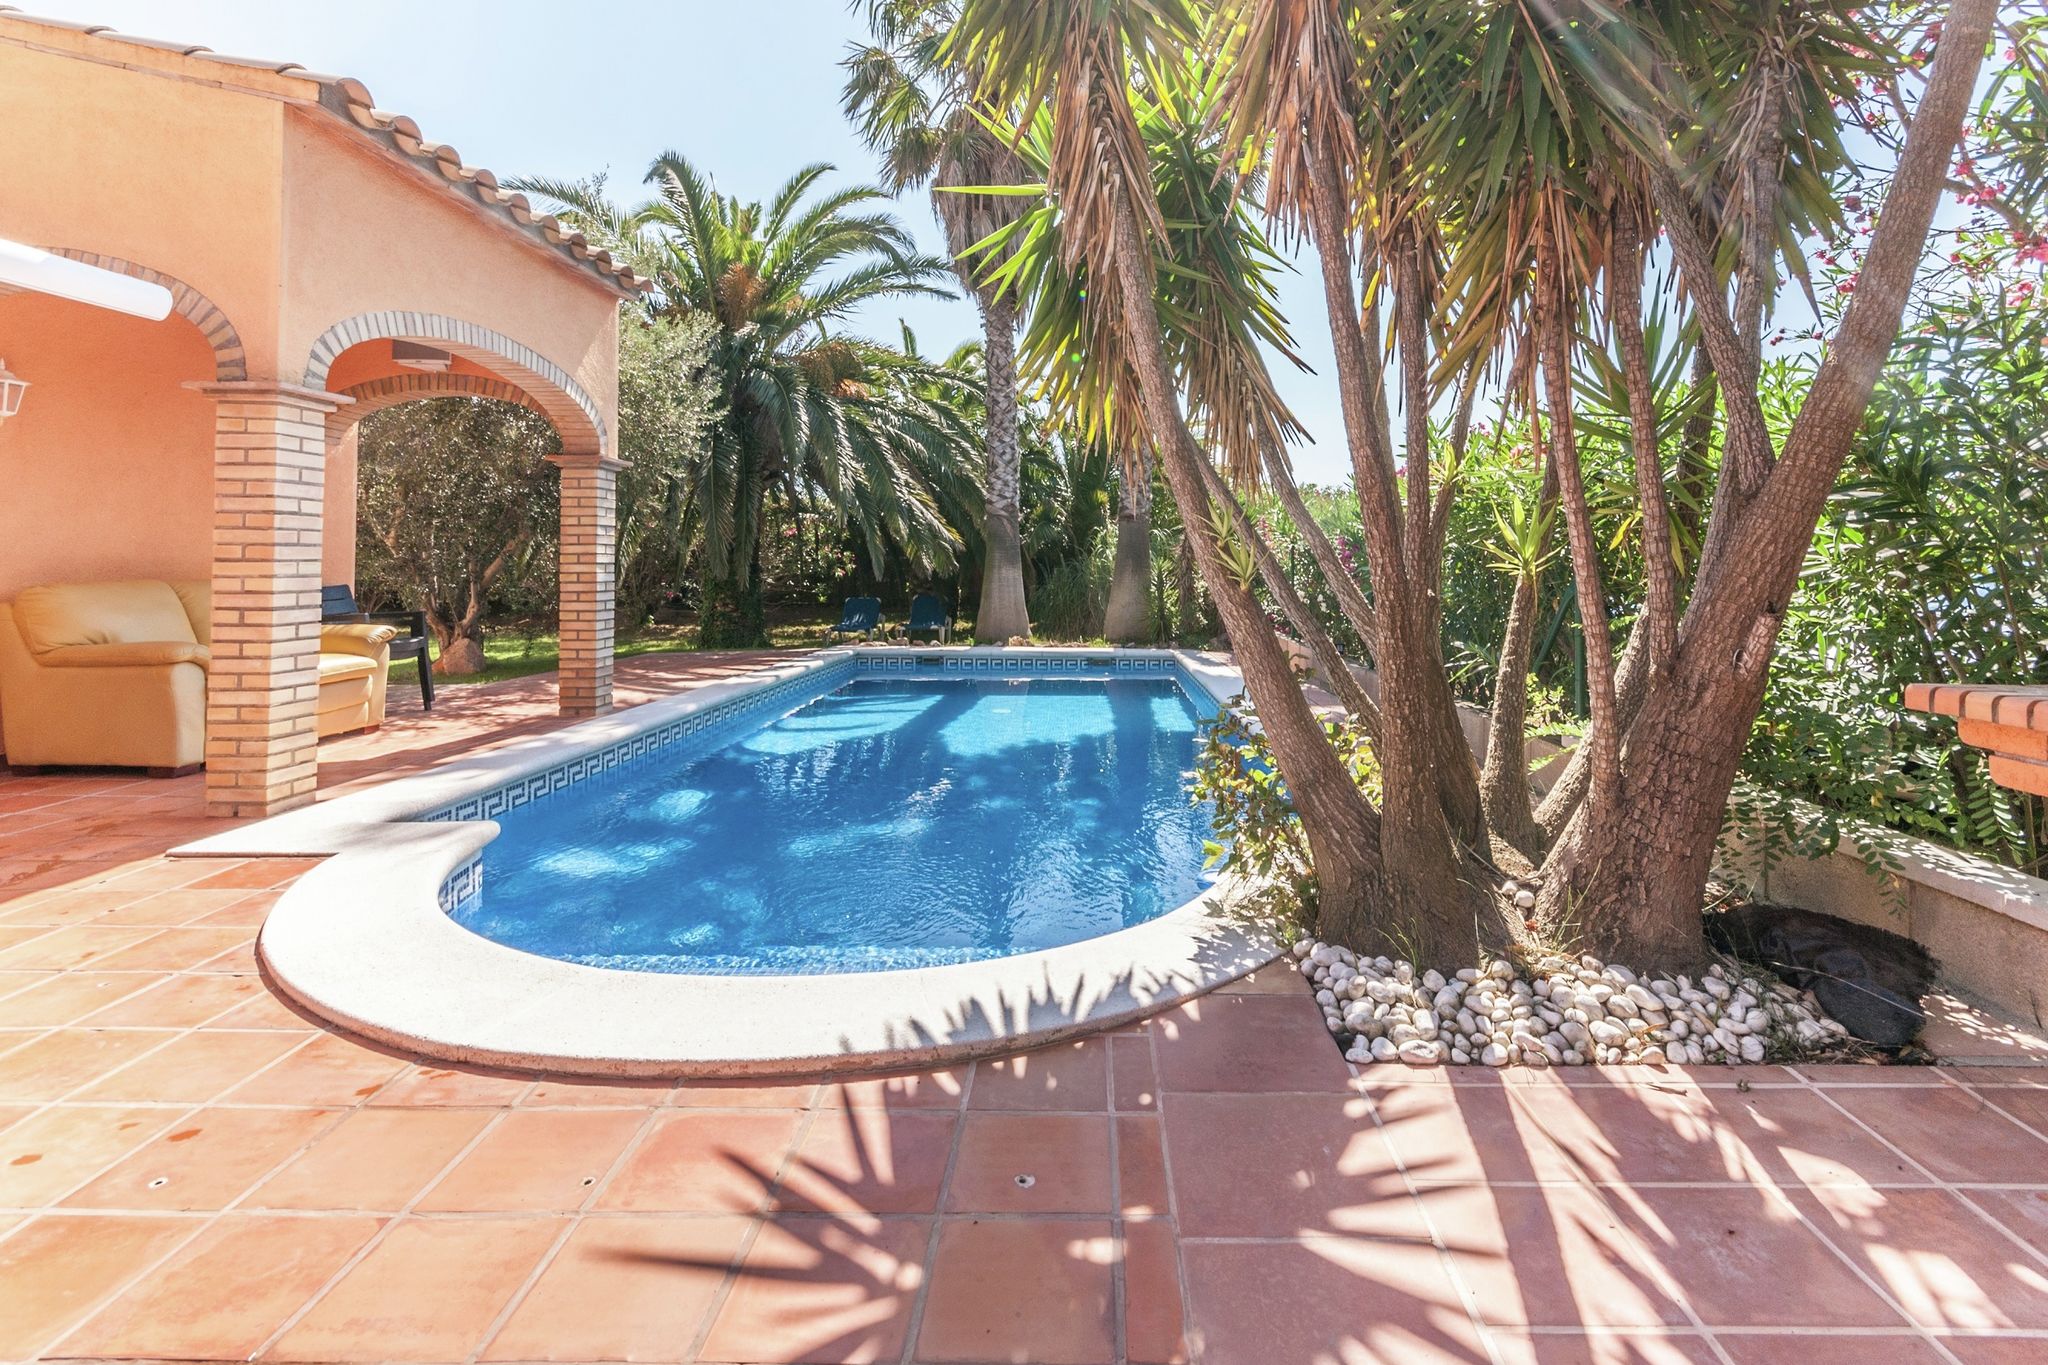 Fantastic holiday home with private pool at the port including a private berth